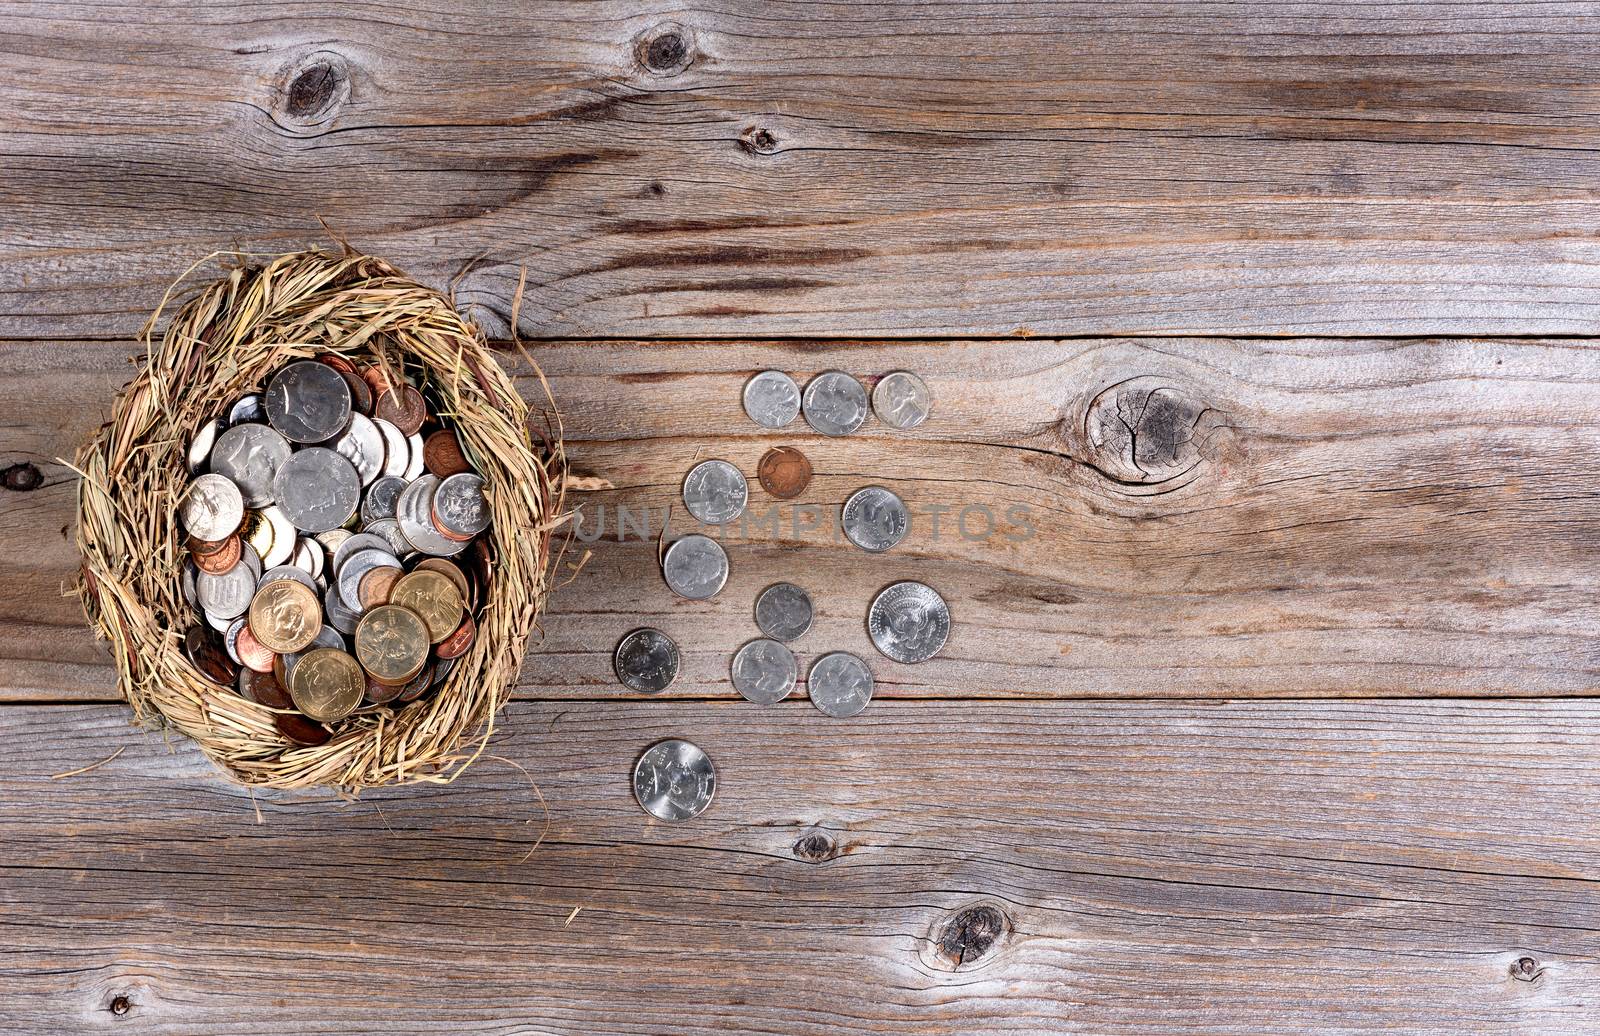 Nest egg filled with coin money for the future by tab1962